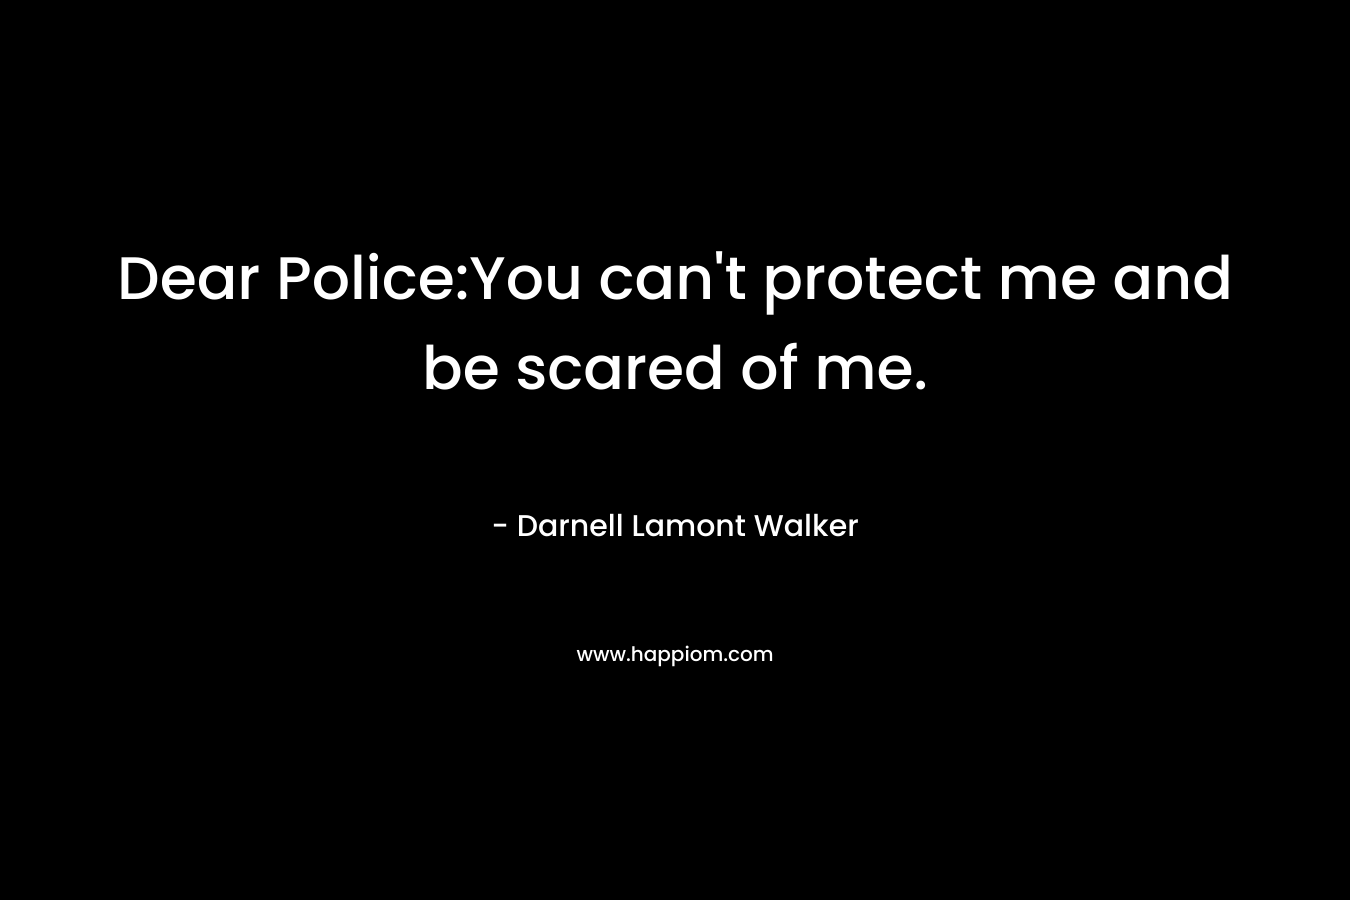 Dear Police:You can’t protect me and be scared of me. – Darnell Lamont Walker